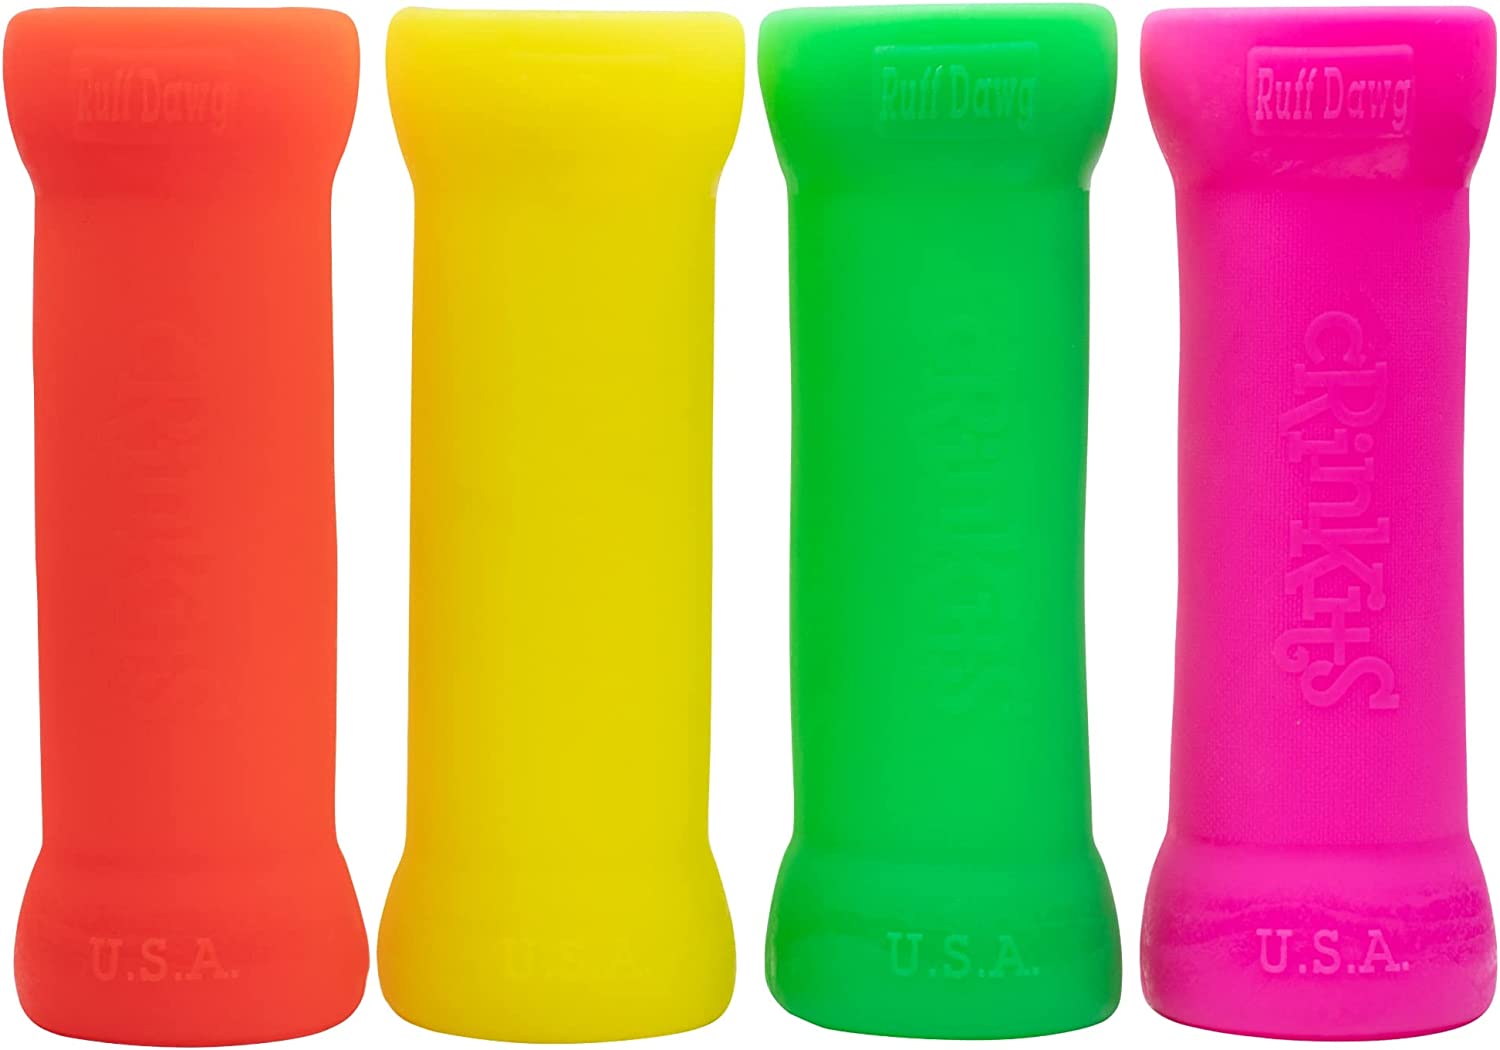 Ruff Dawg Crinkit XL - Throw and Retrieve Water Bottle Dog Toy, Solid Rubber, Includes Water Bottle, Floats, Recyclable, Made in The USA, 9.5in, Dogs Over 40 lbs